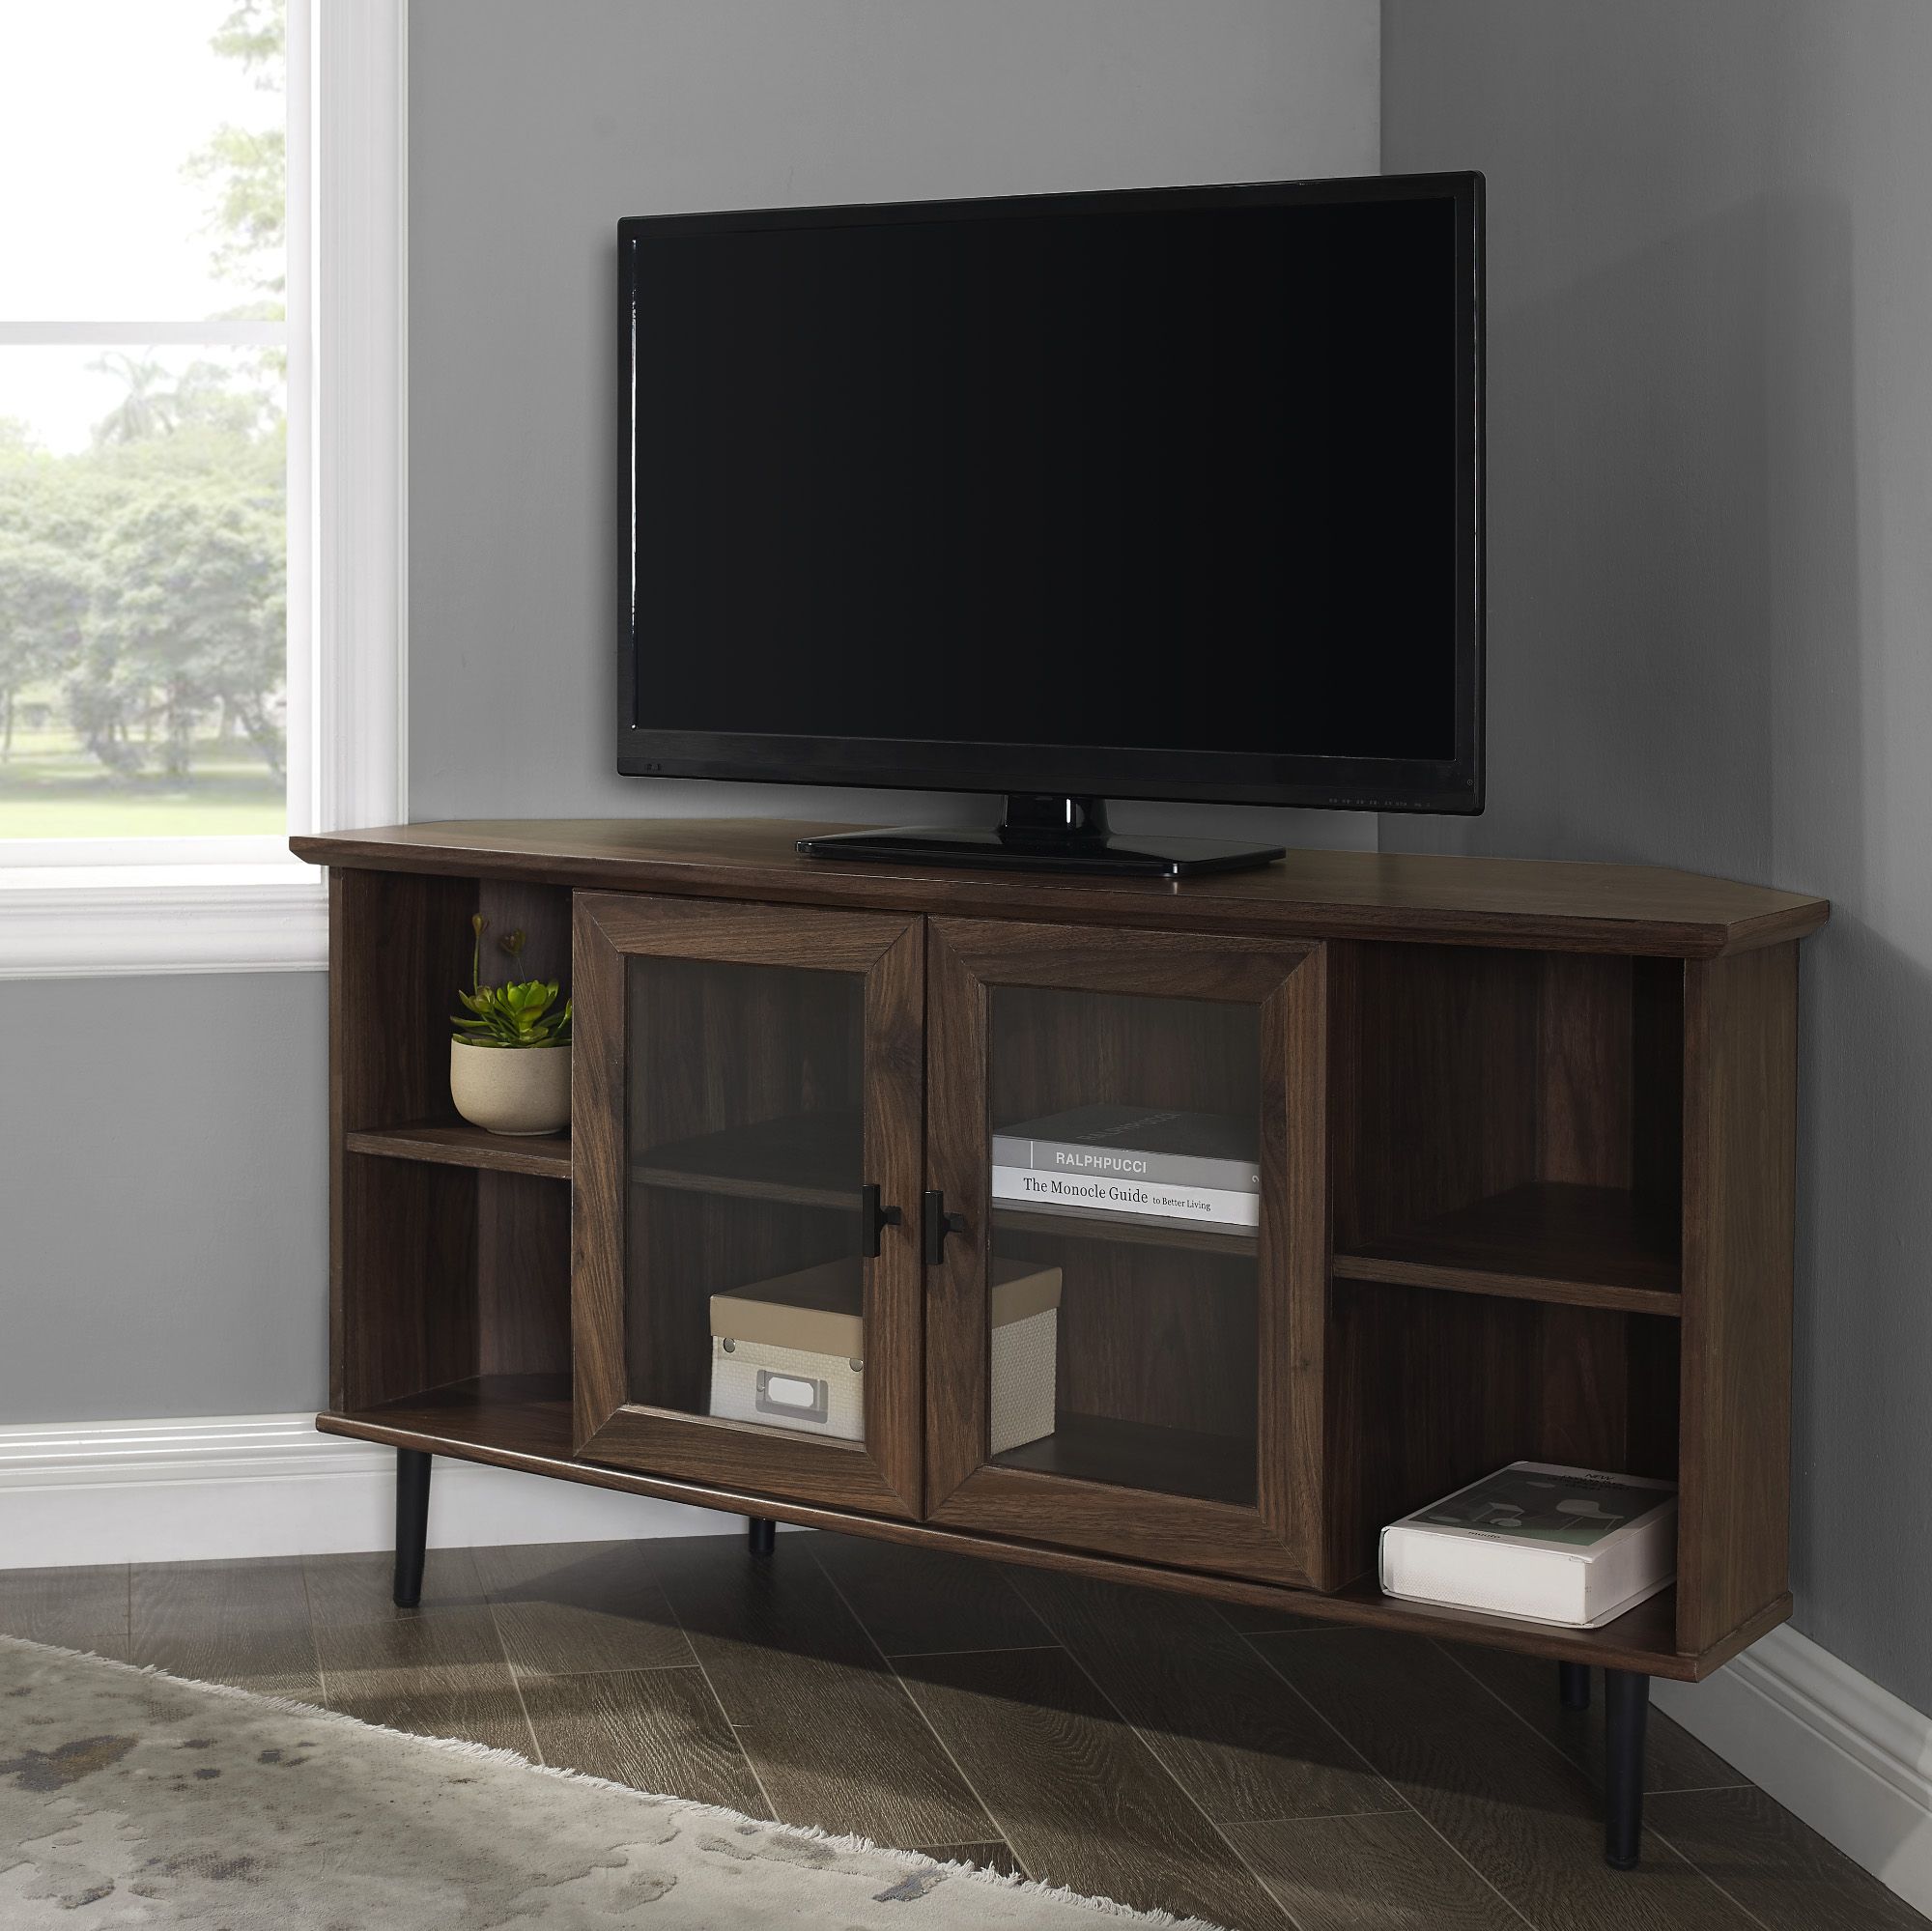 Manor Park Glass Door Corner Tv Stand For Tvs Up To 55 Within Tv Stands Rounded Corners (View 2 of 15)